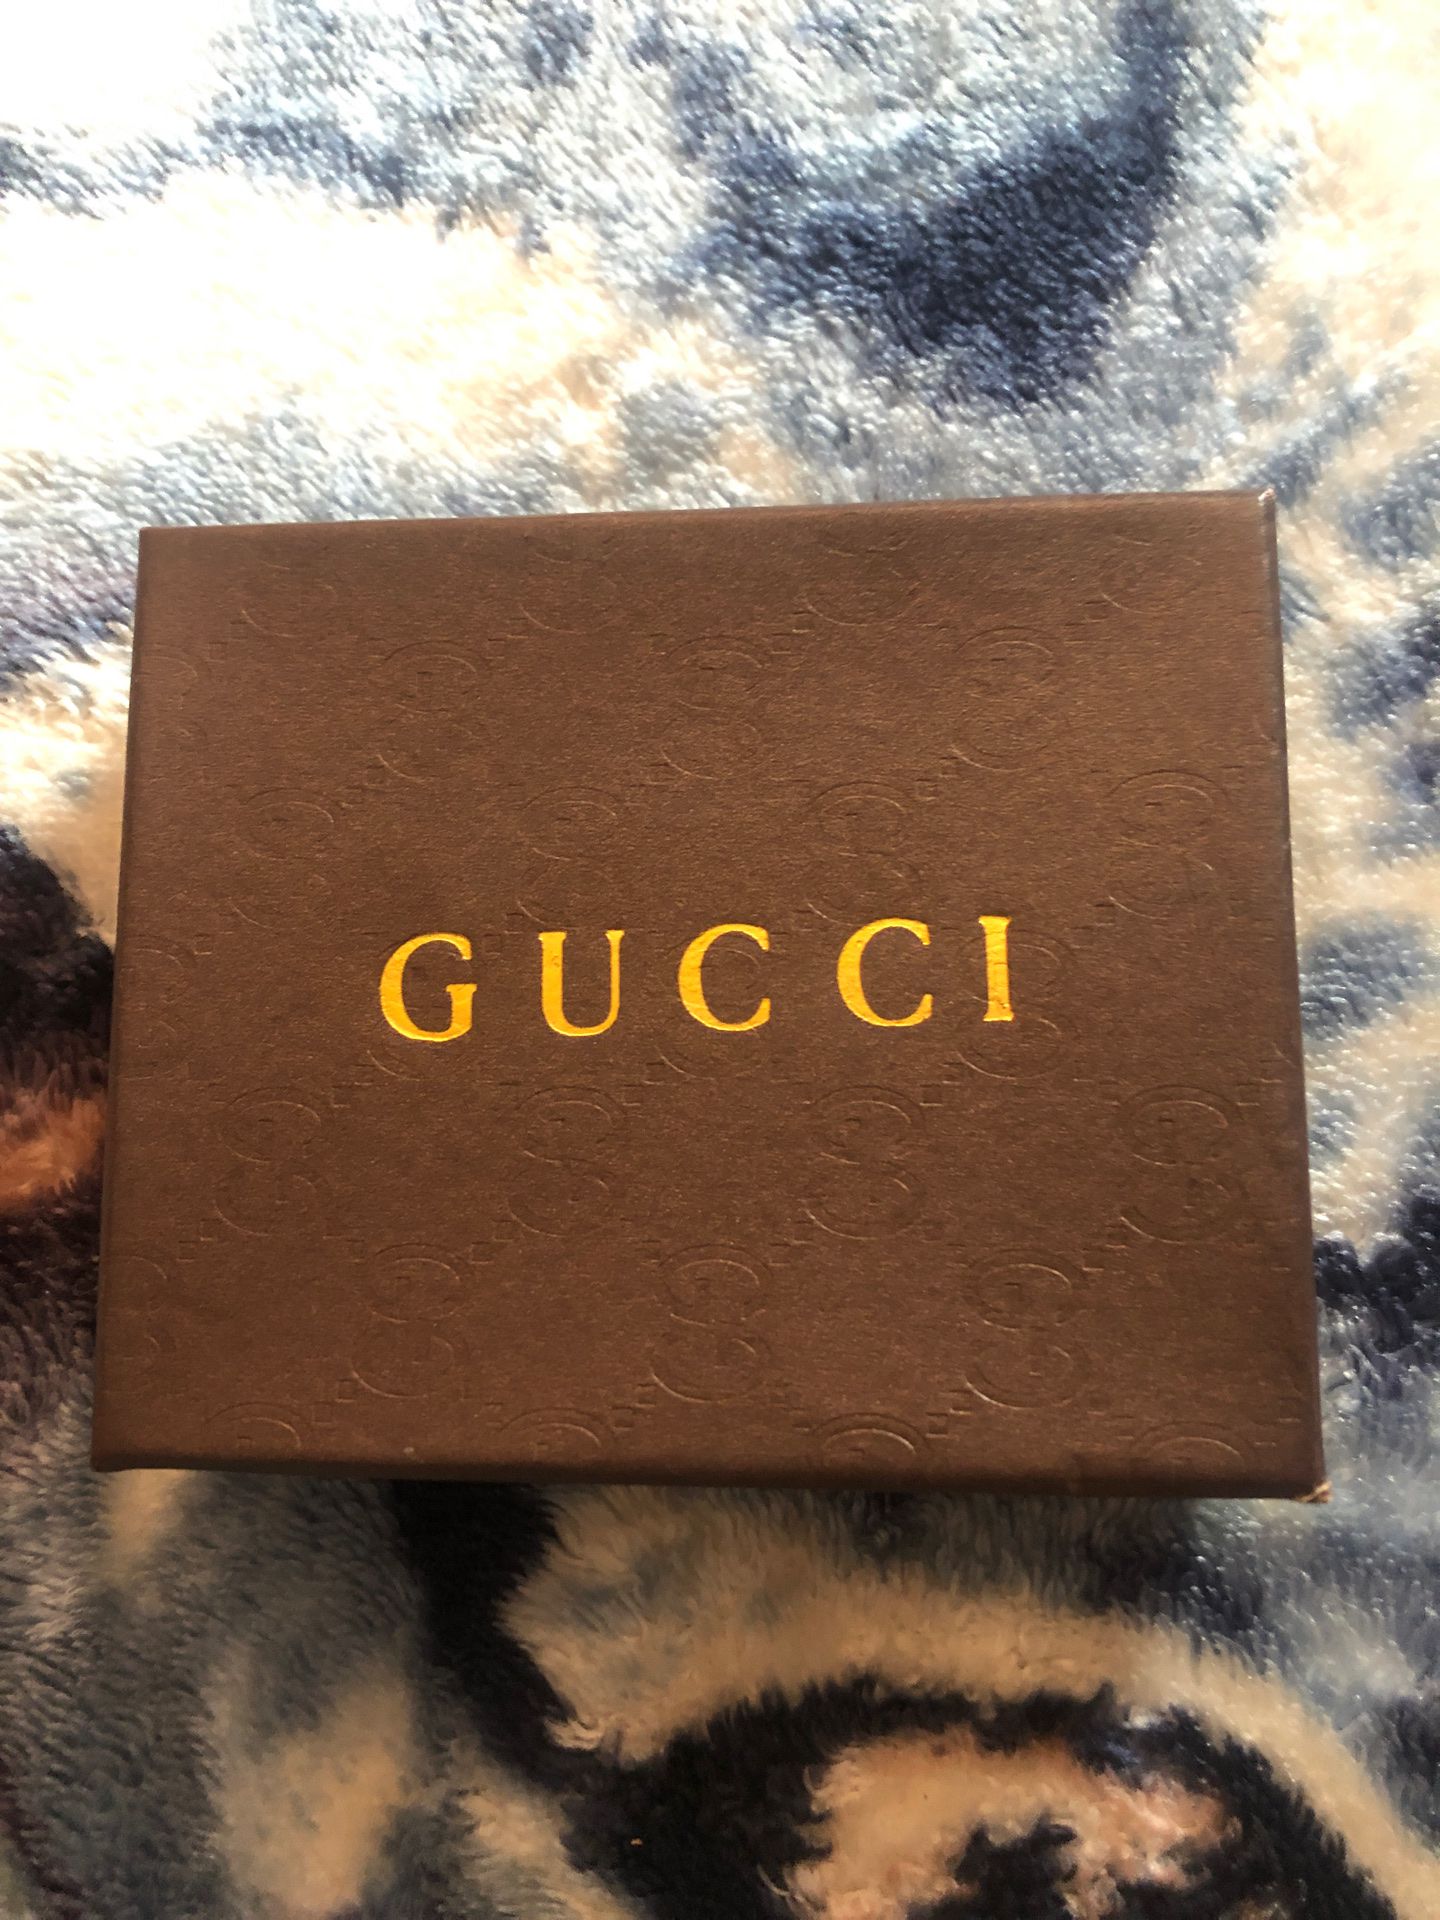 Gucci wallet new in box $80or best offer I’m not a wallet guy u will see in the last picture